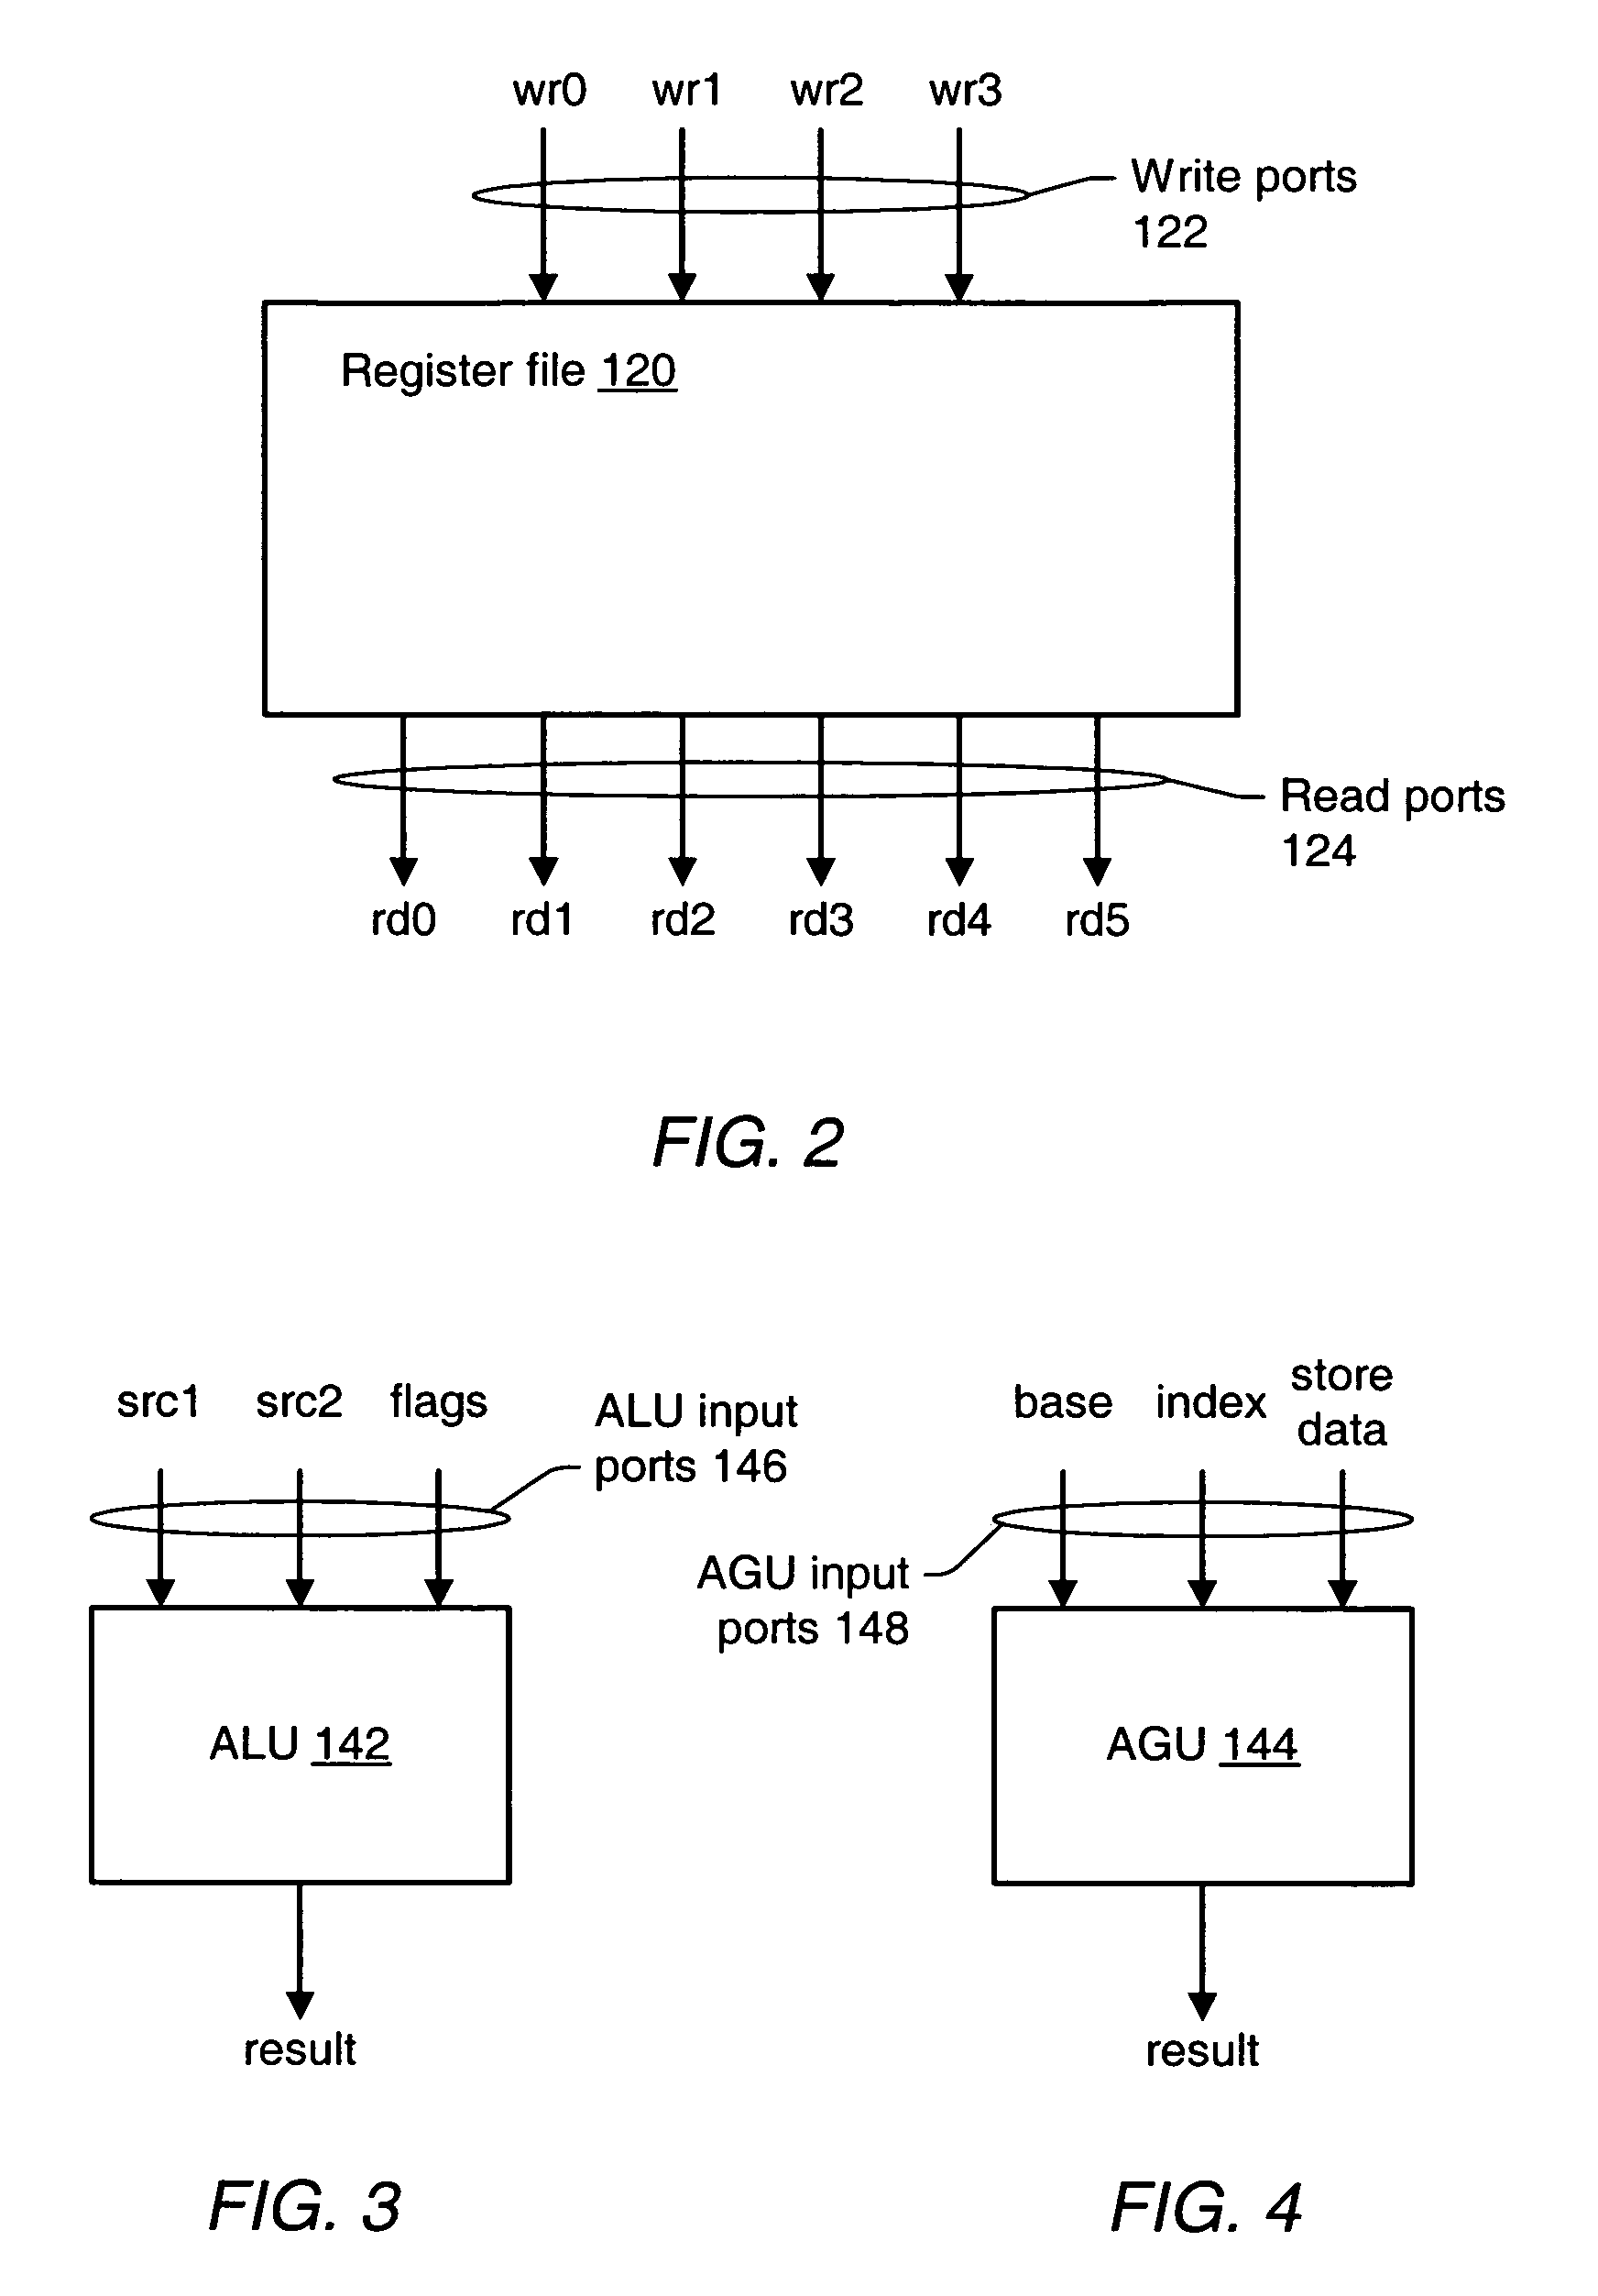 Apparatus and method for port arbitration in a register file on the basis of functional unit issue slots